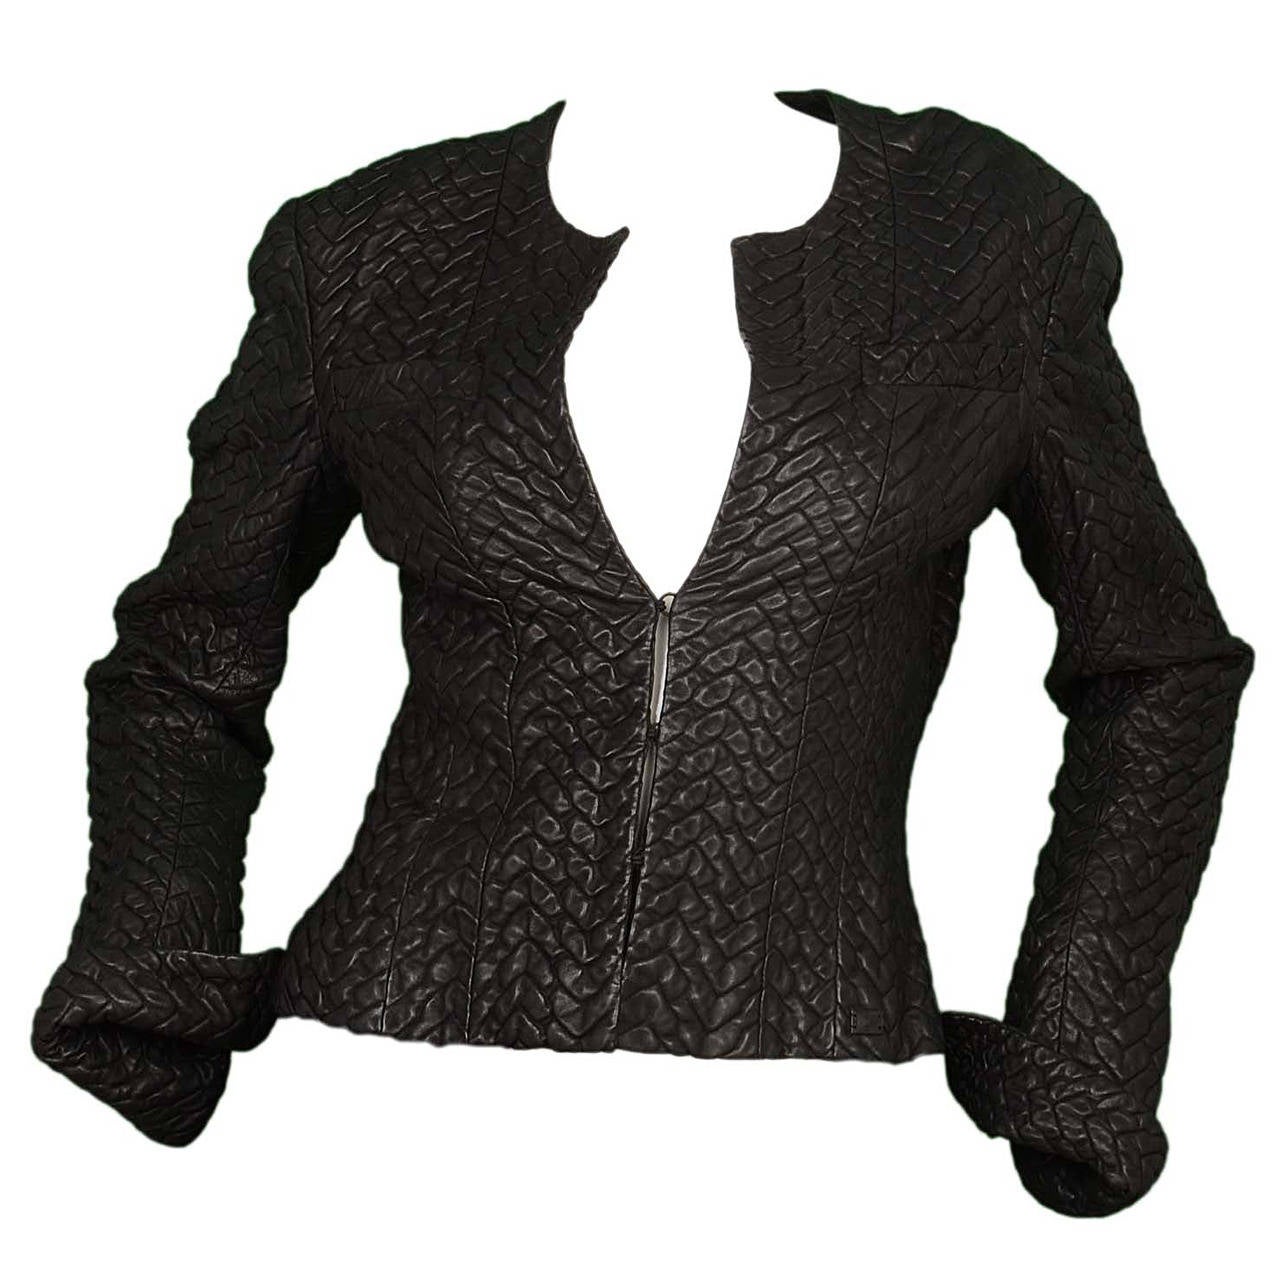 CHANEL 2003 Black Quilted Leather Jacket sz 38 at 1stdibs